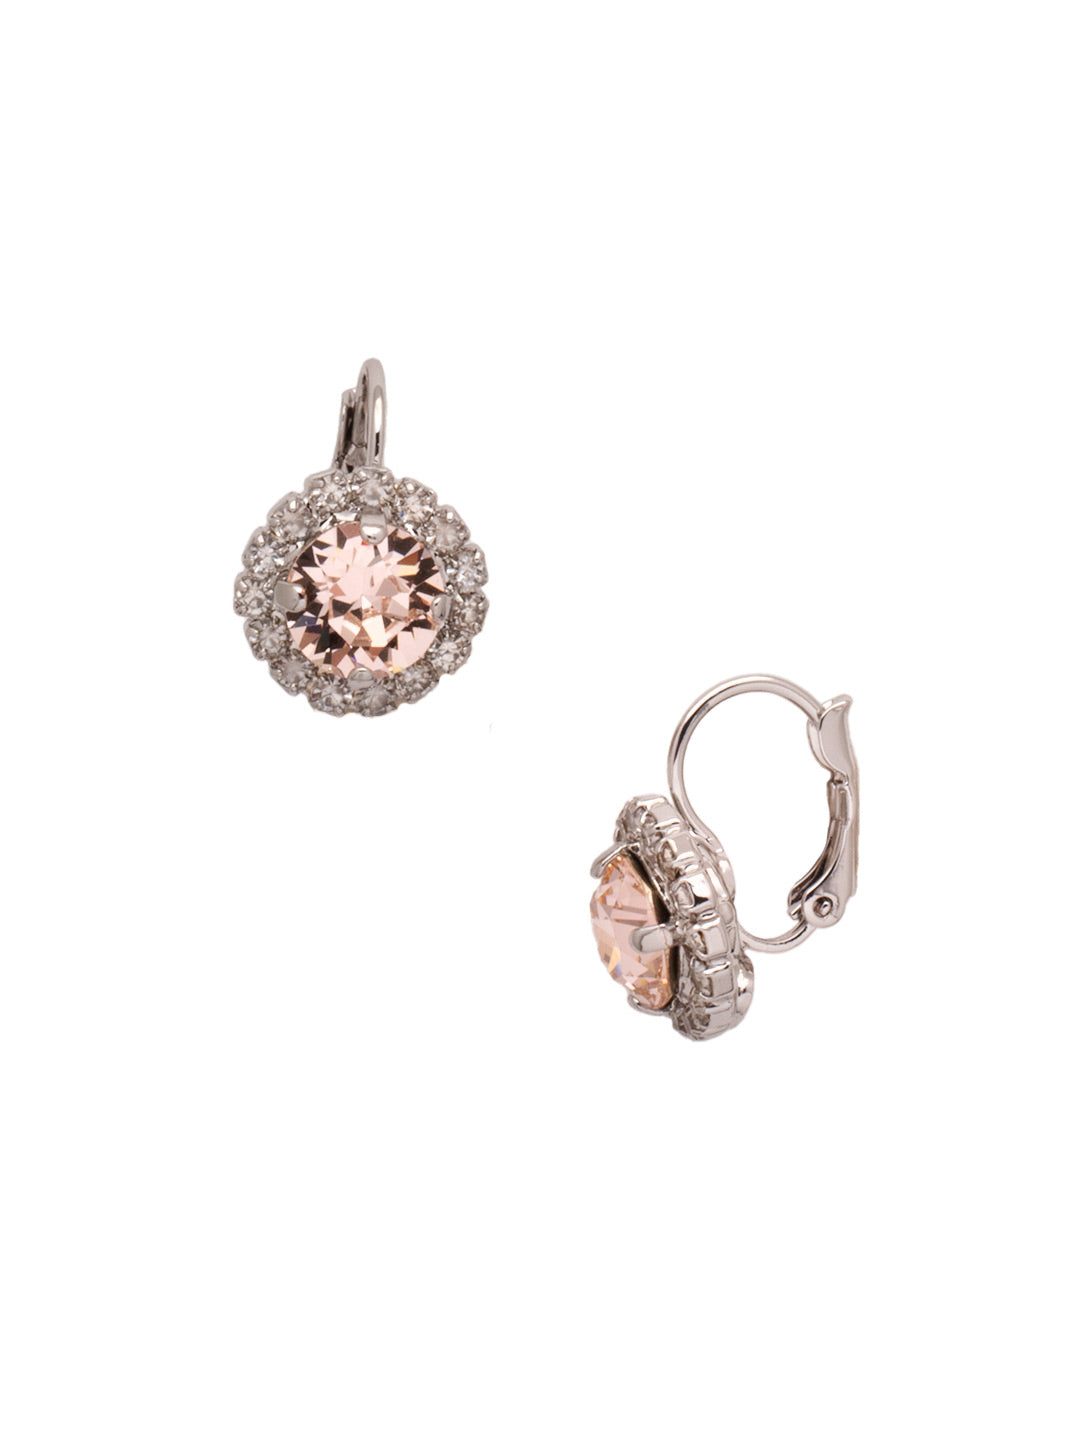 Haute Halo Dangle Earrings - EDL10PDSNB - <p>A central round crystal with an elegant halo of gems embodies elegance and style. From Sorrelli's Snow Bunny collection in our Palladium finish.</p>